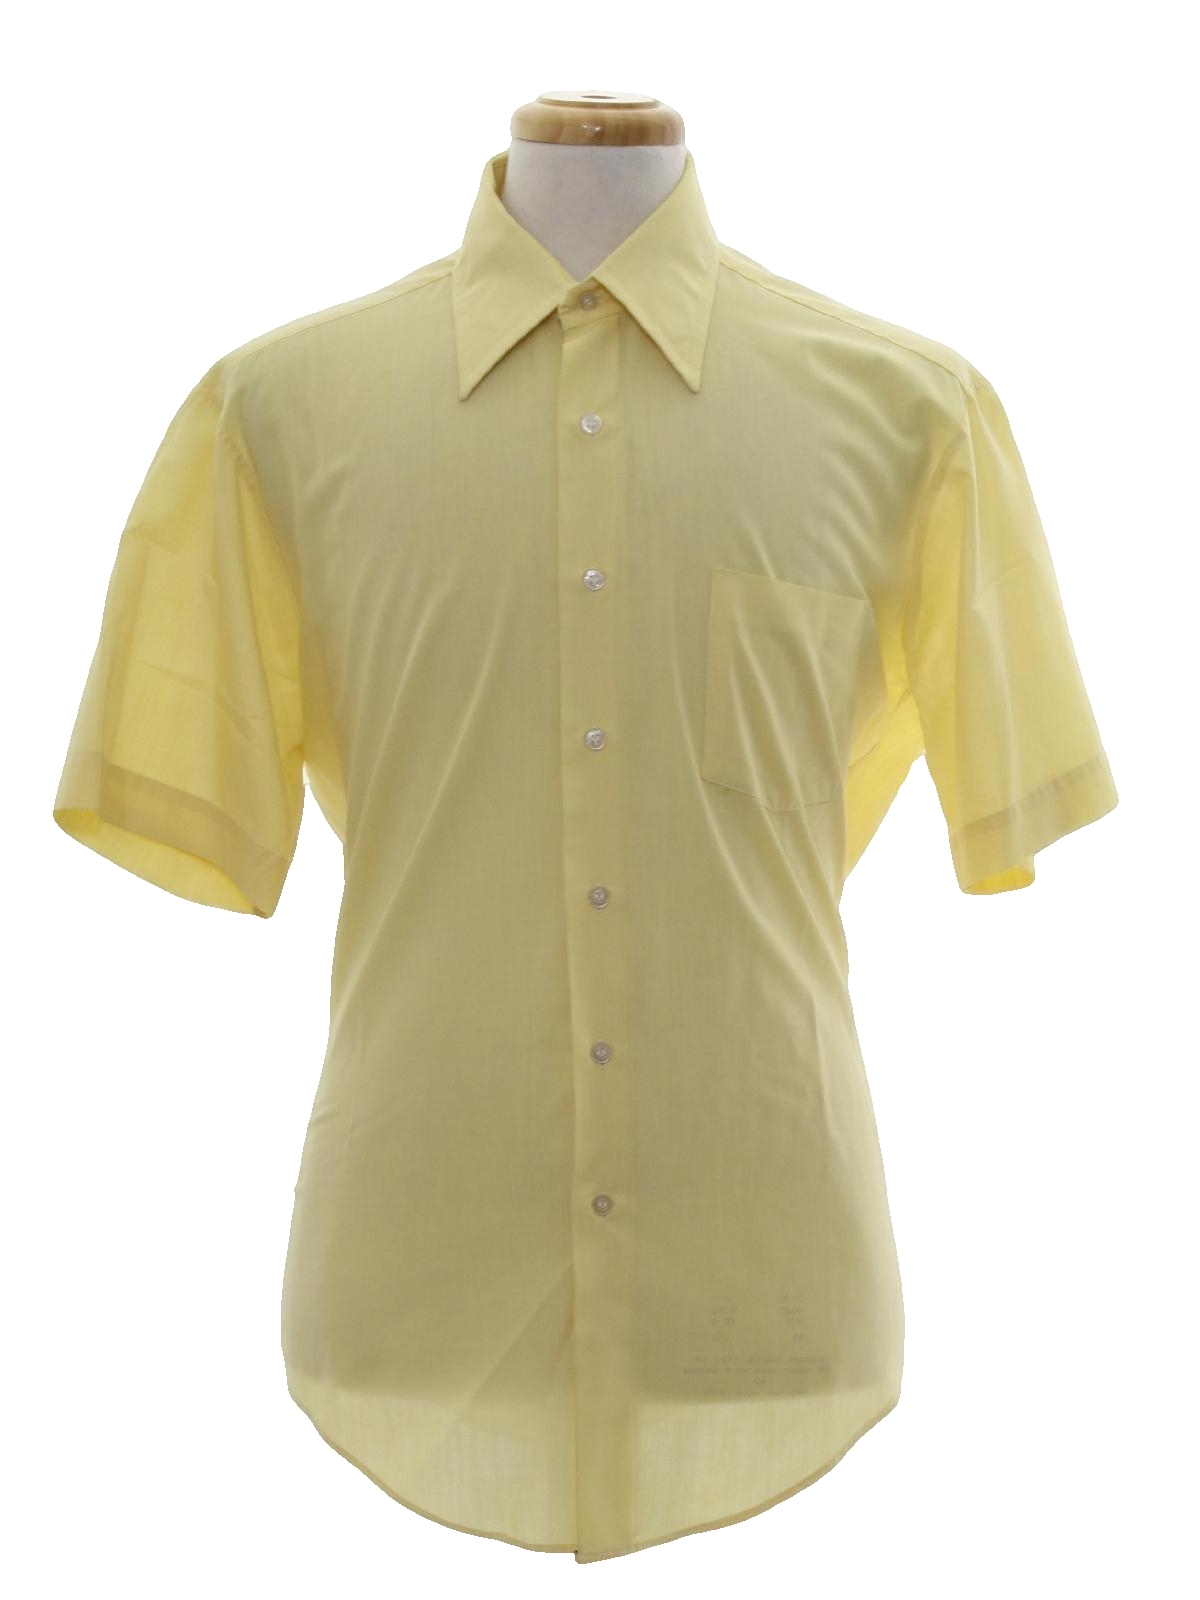 1970's Shirt (Sears): 70s -Sears- Mens yellow, blended cotton, short ...